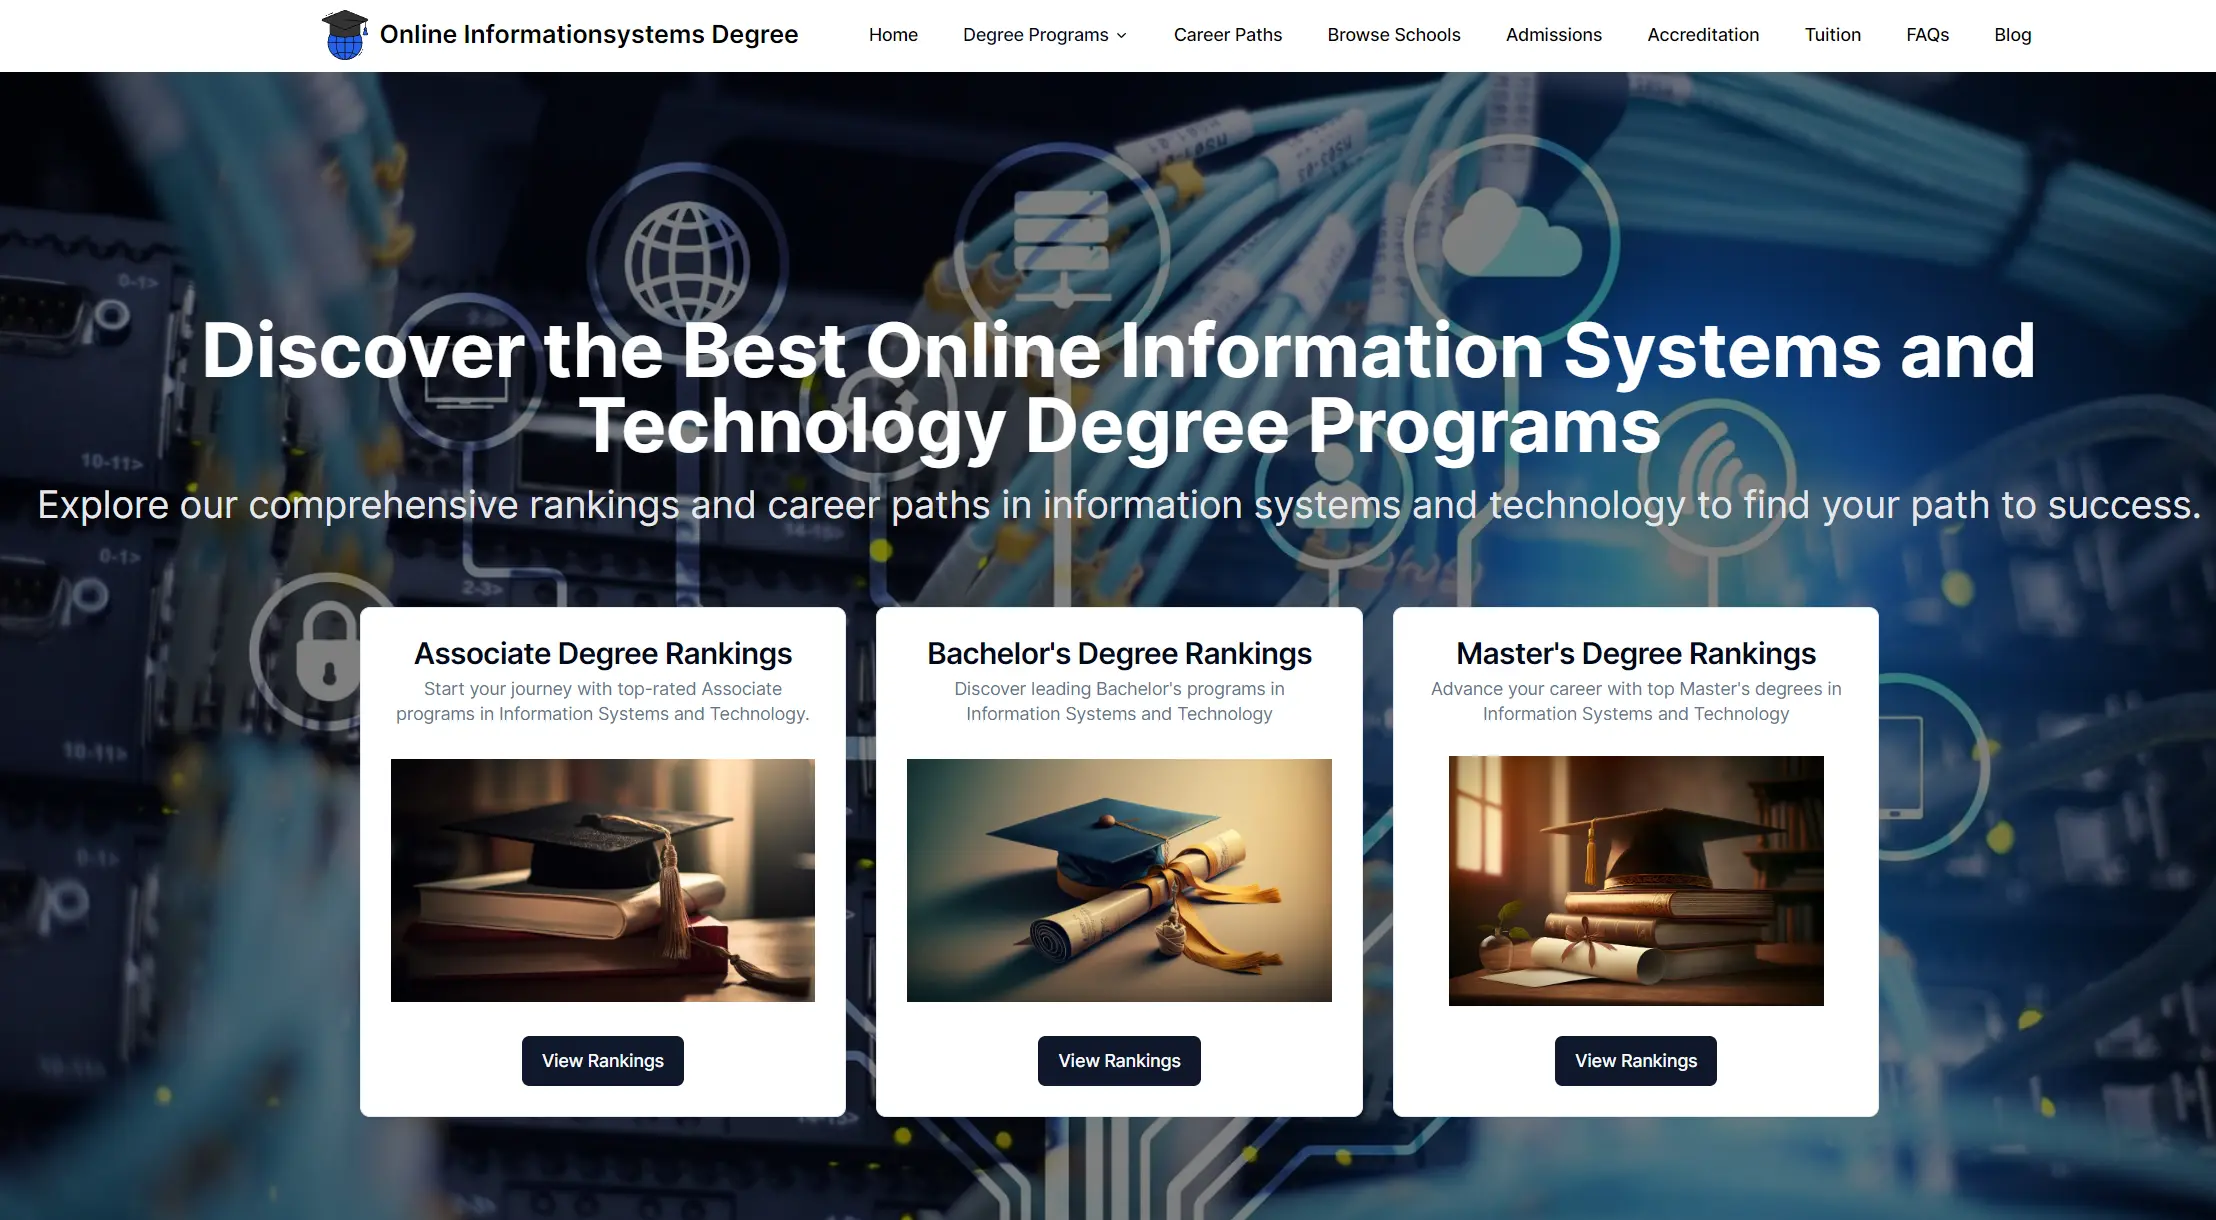 Online Information Systems Degrees site thumbnail